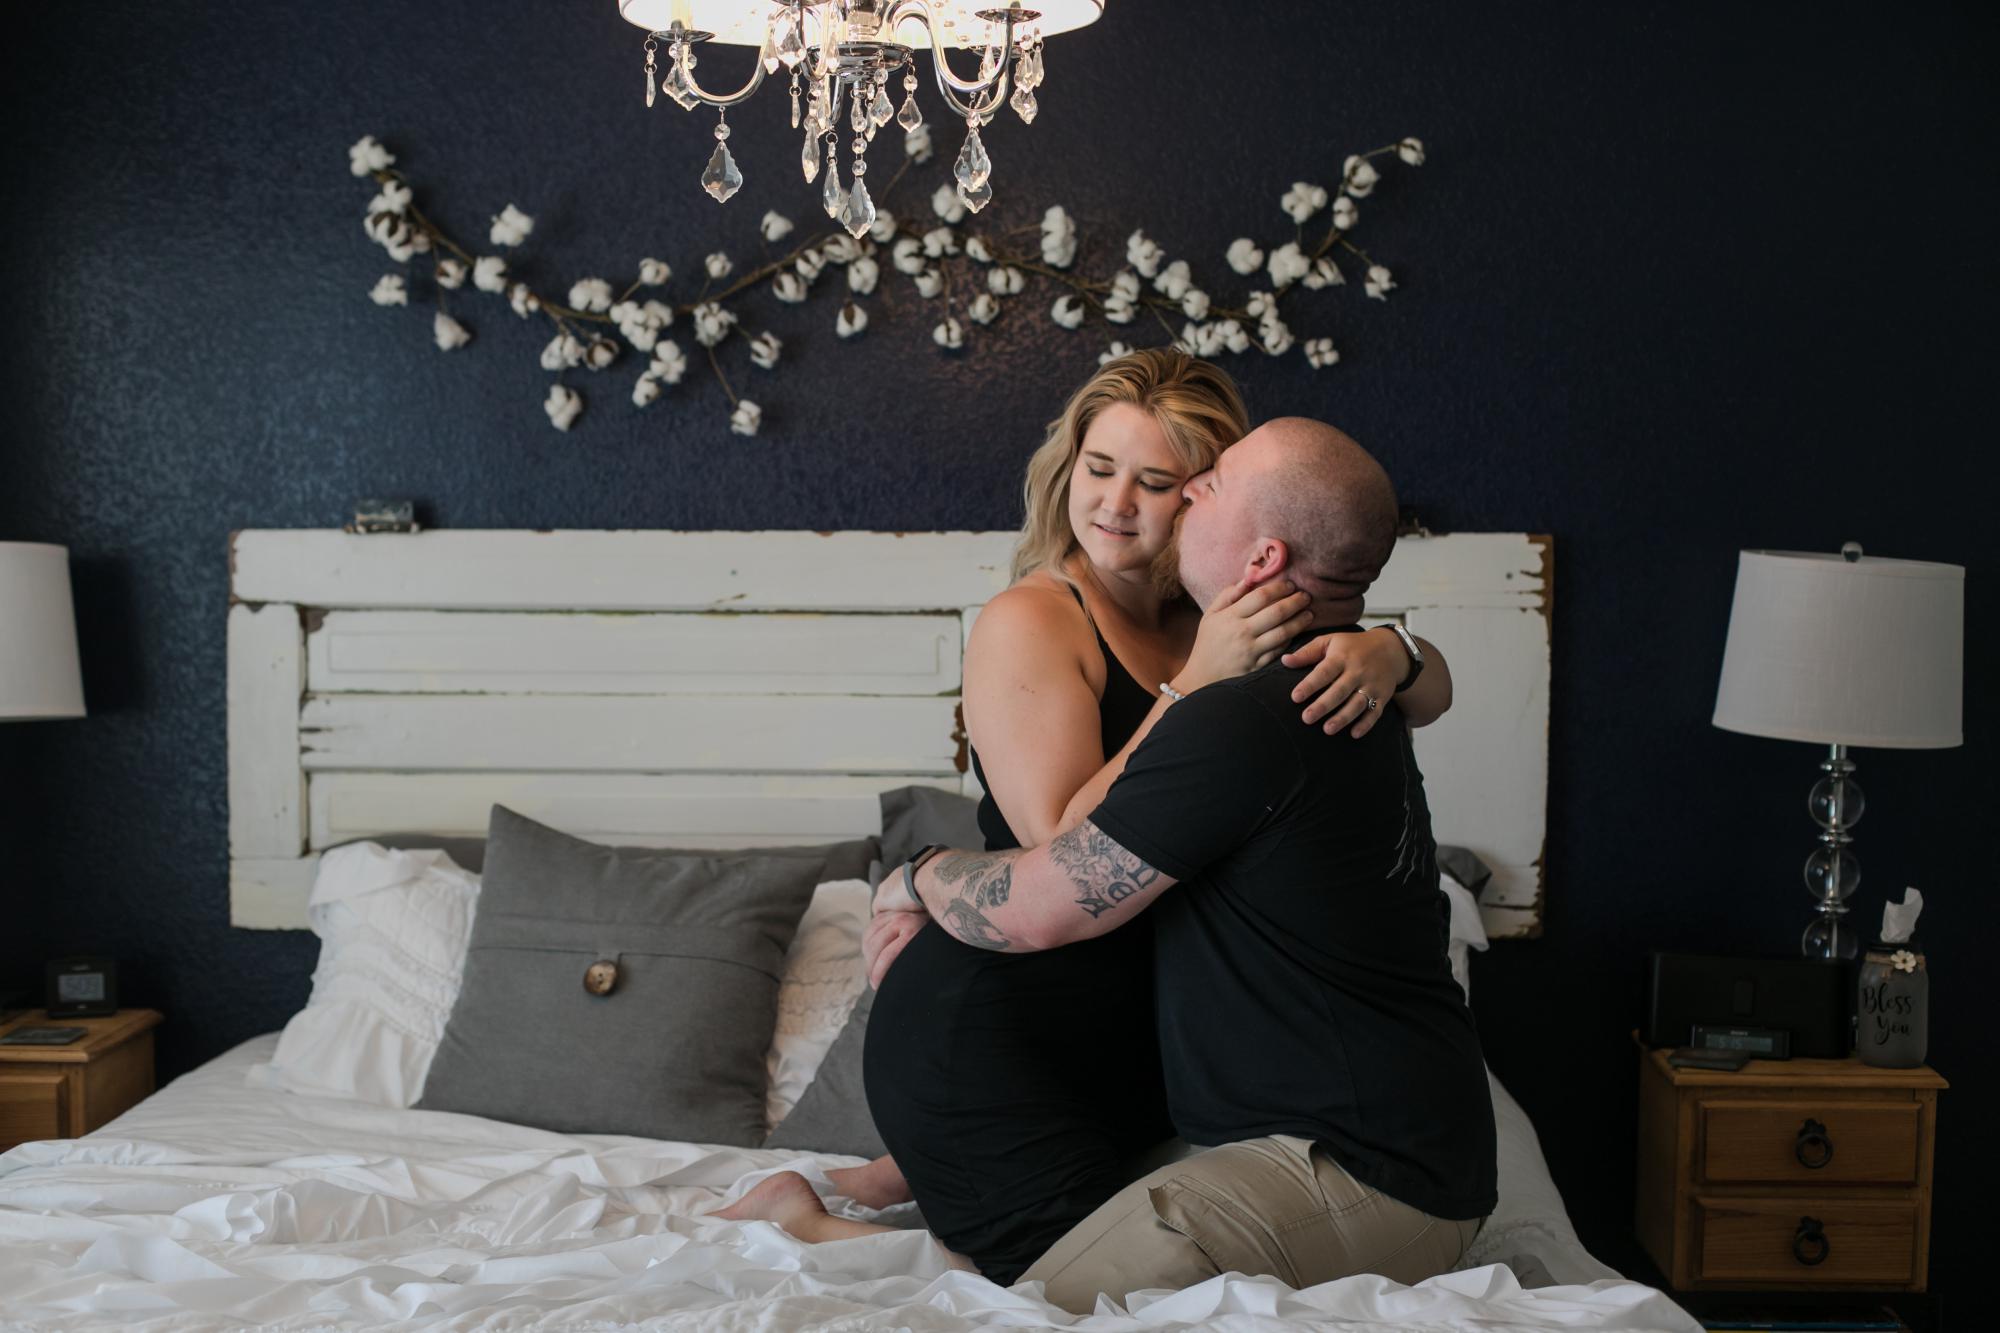 Colorado Springs couple celebrates anniversary with lifestyle photography session